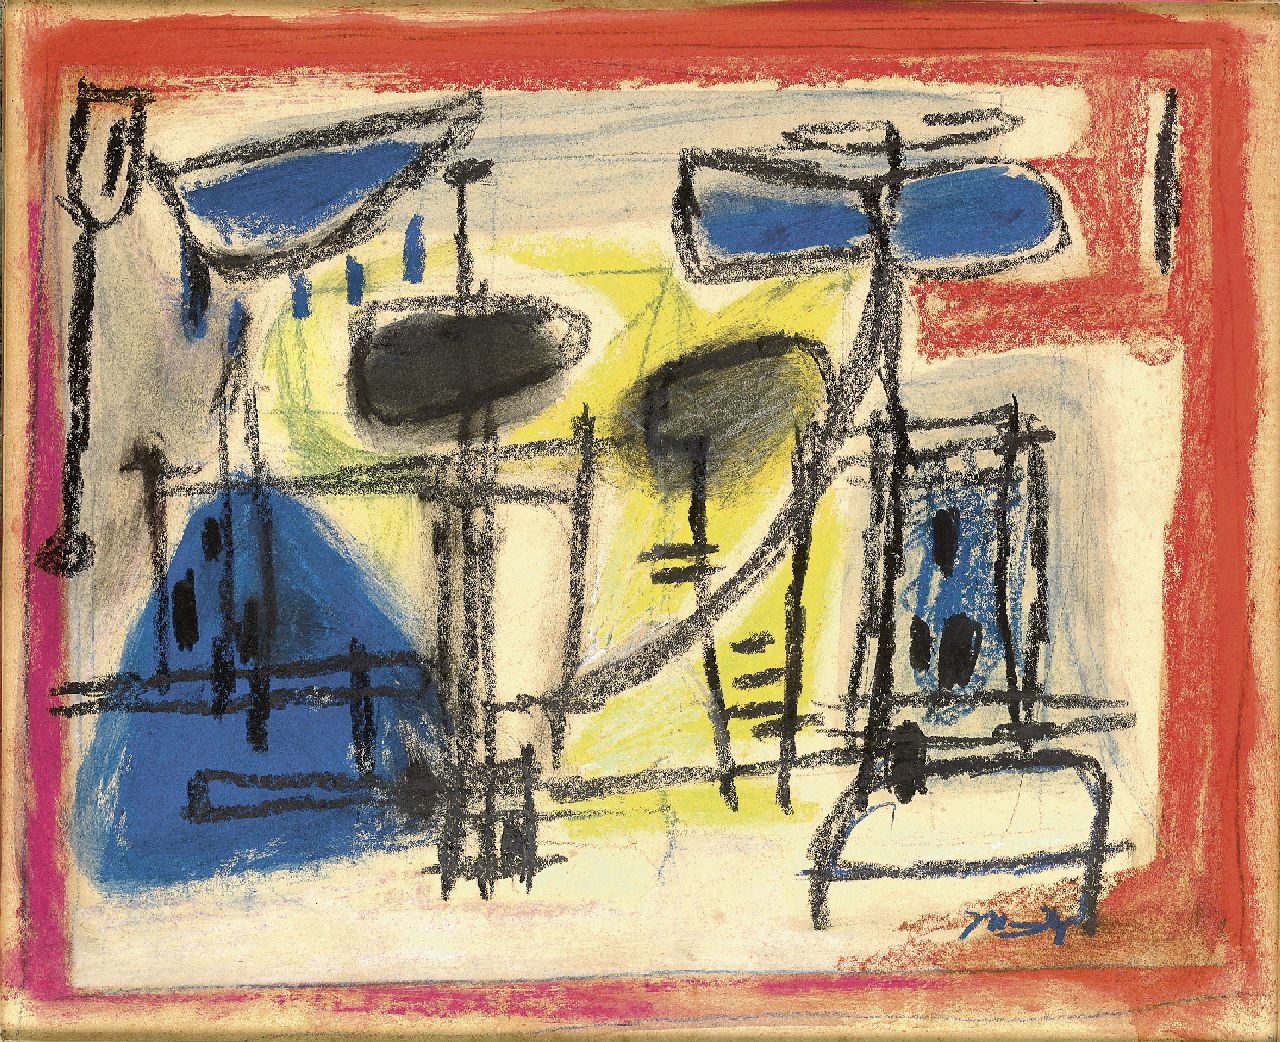 Nanninga J.  | Jacob 'Jaap' Nanninga, Composition with figures, coloured chalk on paper 25.0 x 32.0 cm, signed l.r. and executed ca. 1958